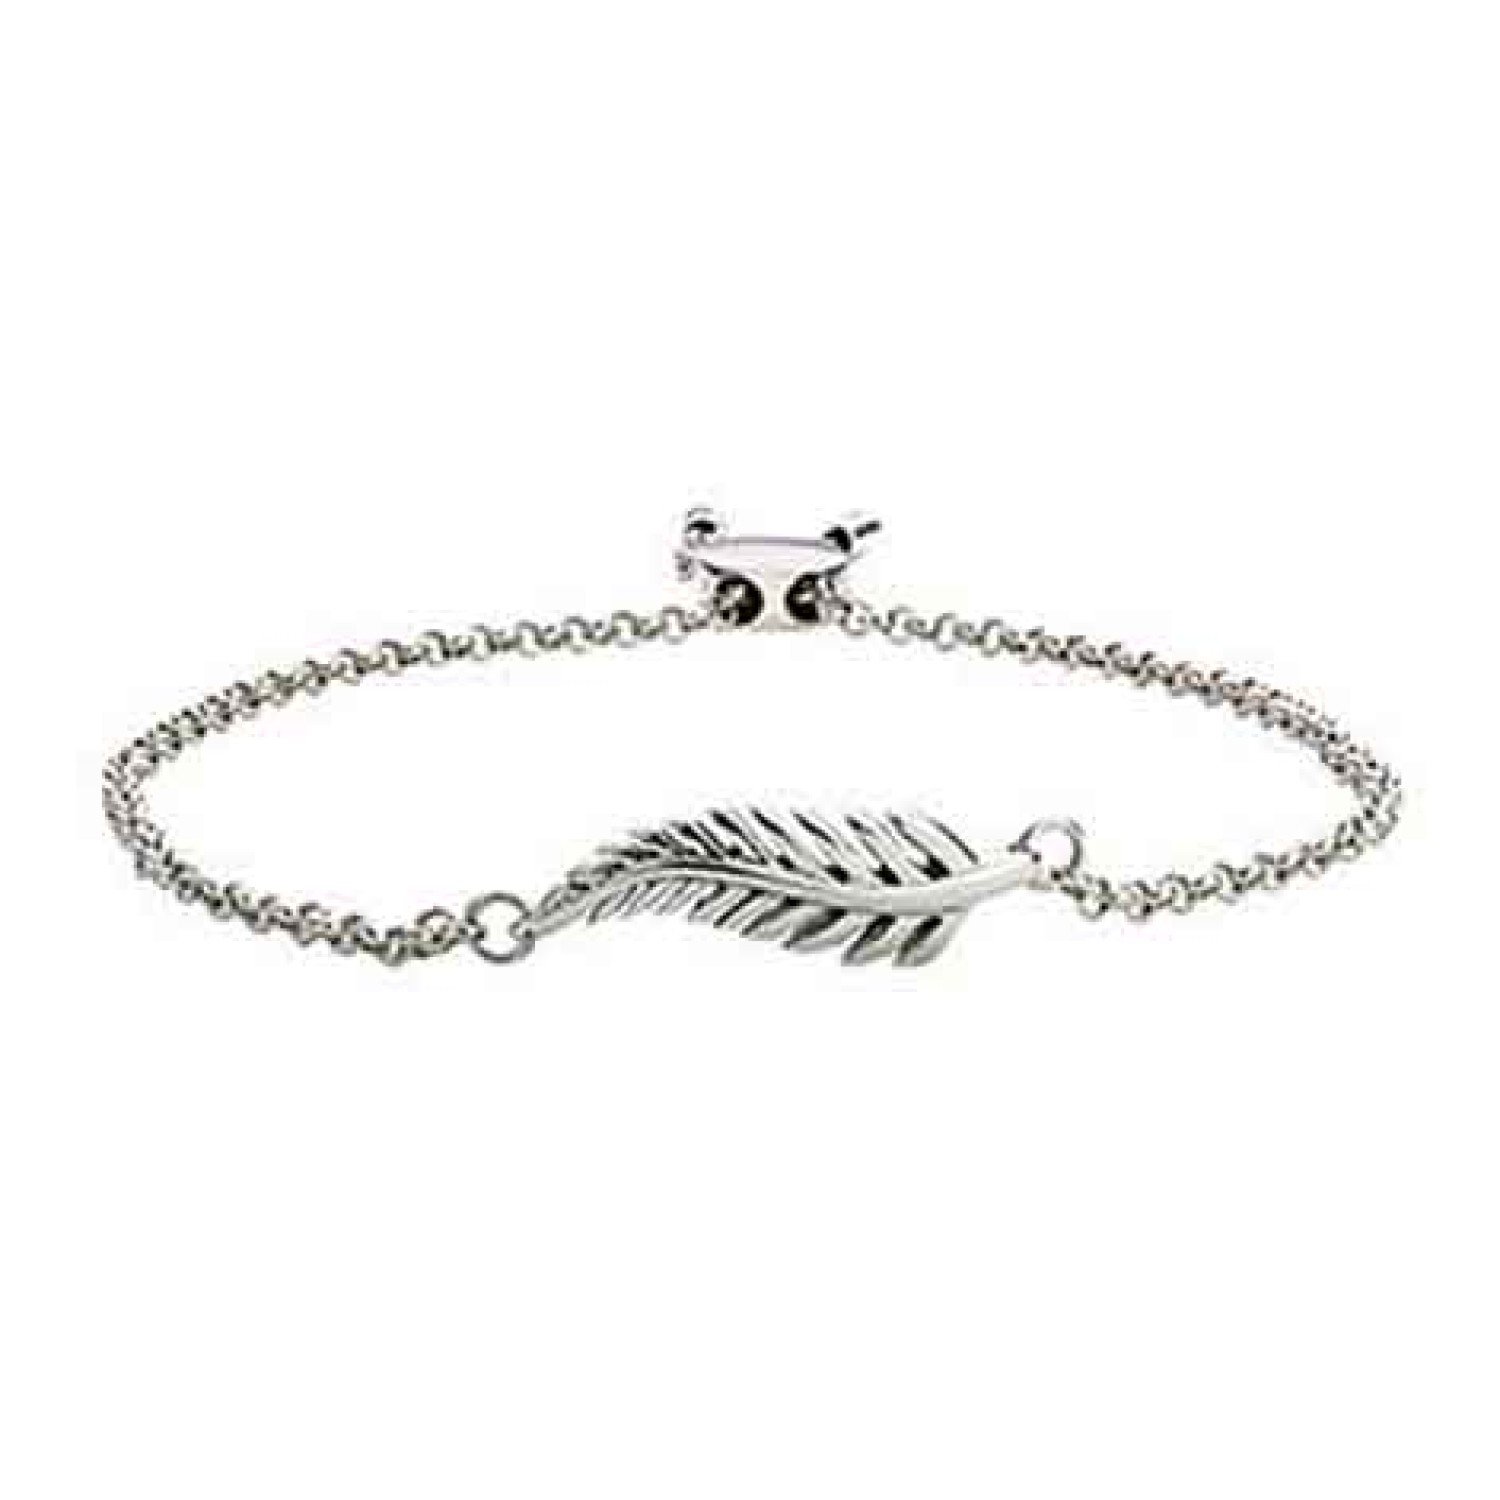 Evolve Silver Forever Fern Bracelet 3B21055. The Silver Fern is a much loved and highly treasured symbol of New Zealand. This iconic design has graced the uniforms of almost every national hero in our history. Our Forever Fern collection celebrates eterna